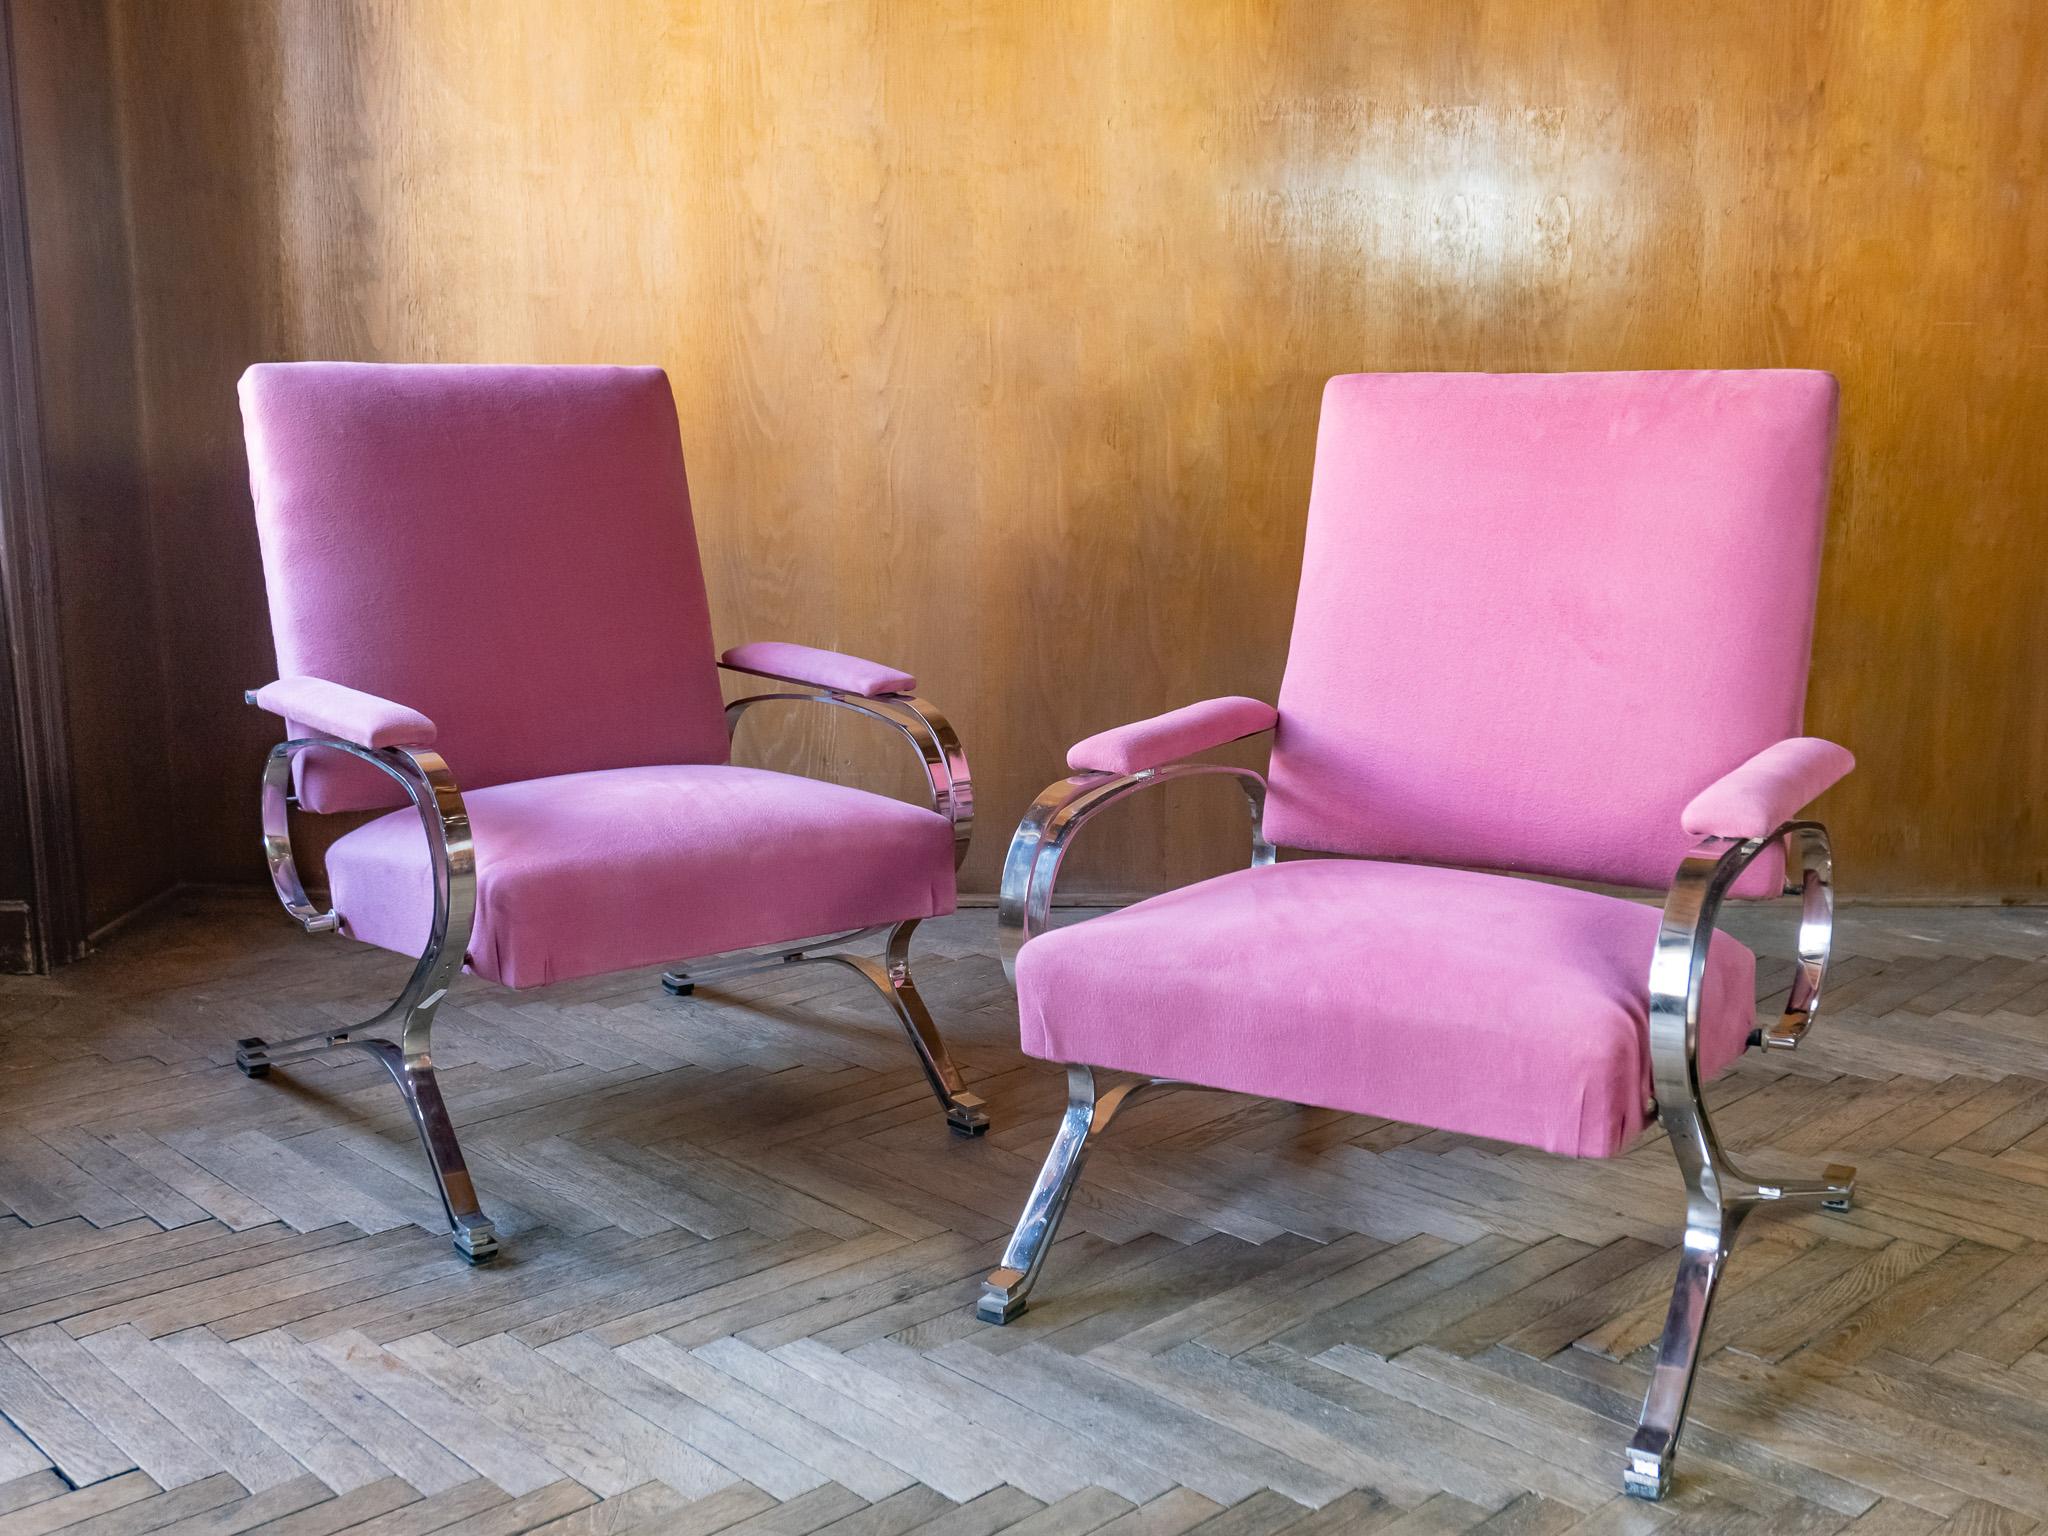 Mid-Century Modern armchairs by Gianni Moscatelli for Formanova, Italy 1970s

This very rare pair of pink lounge chairs named “Micaela” by Gianni Moscatelli are made of a shiny steel construction with a soft, pink upholstery. Due to their spring